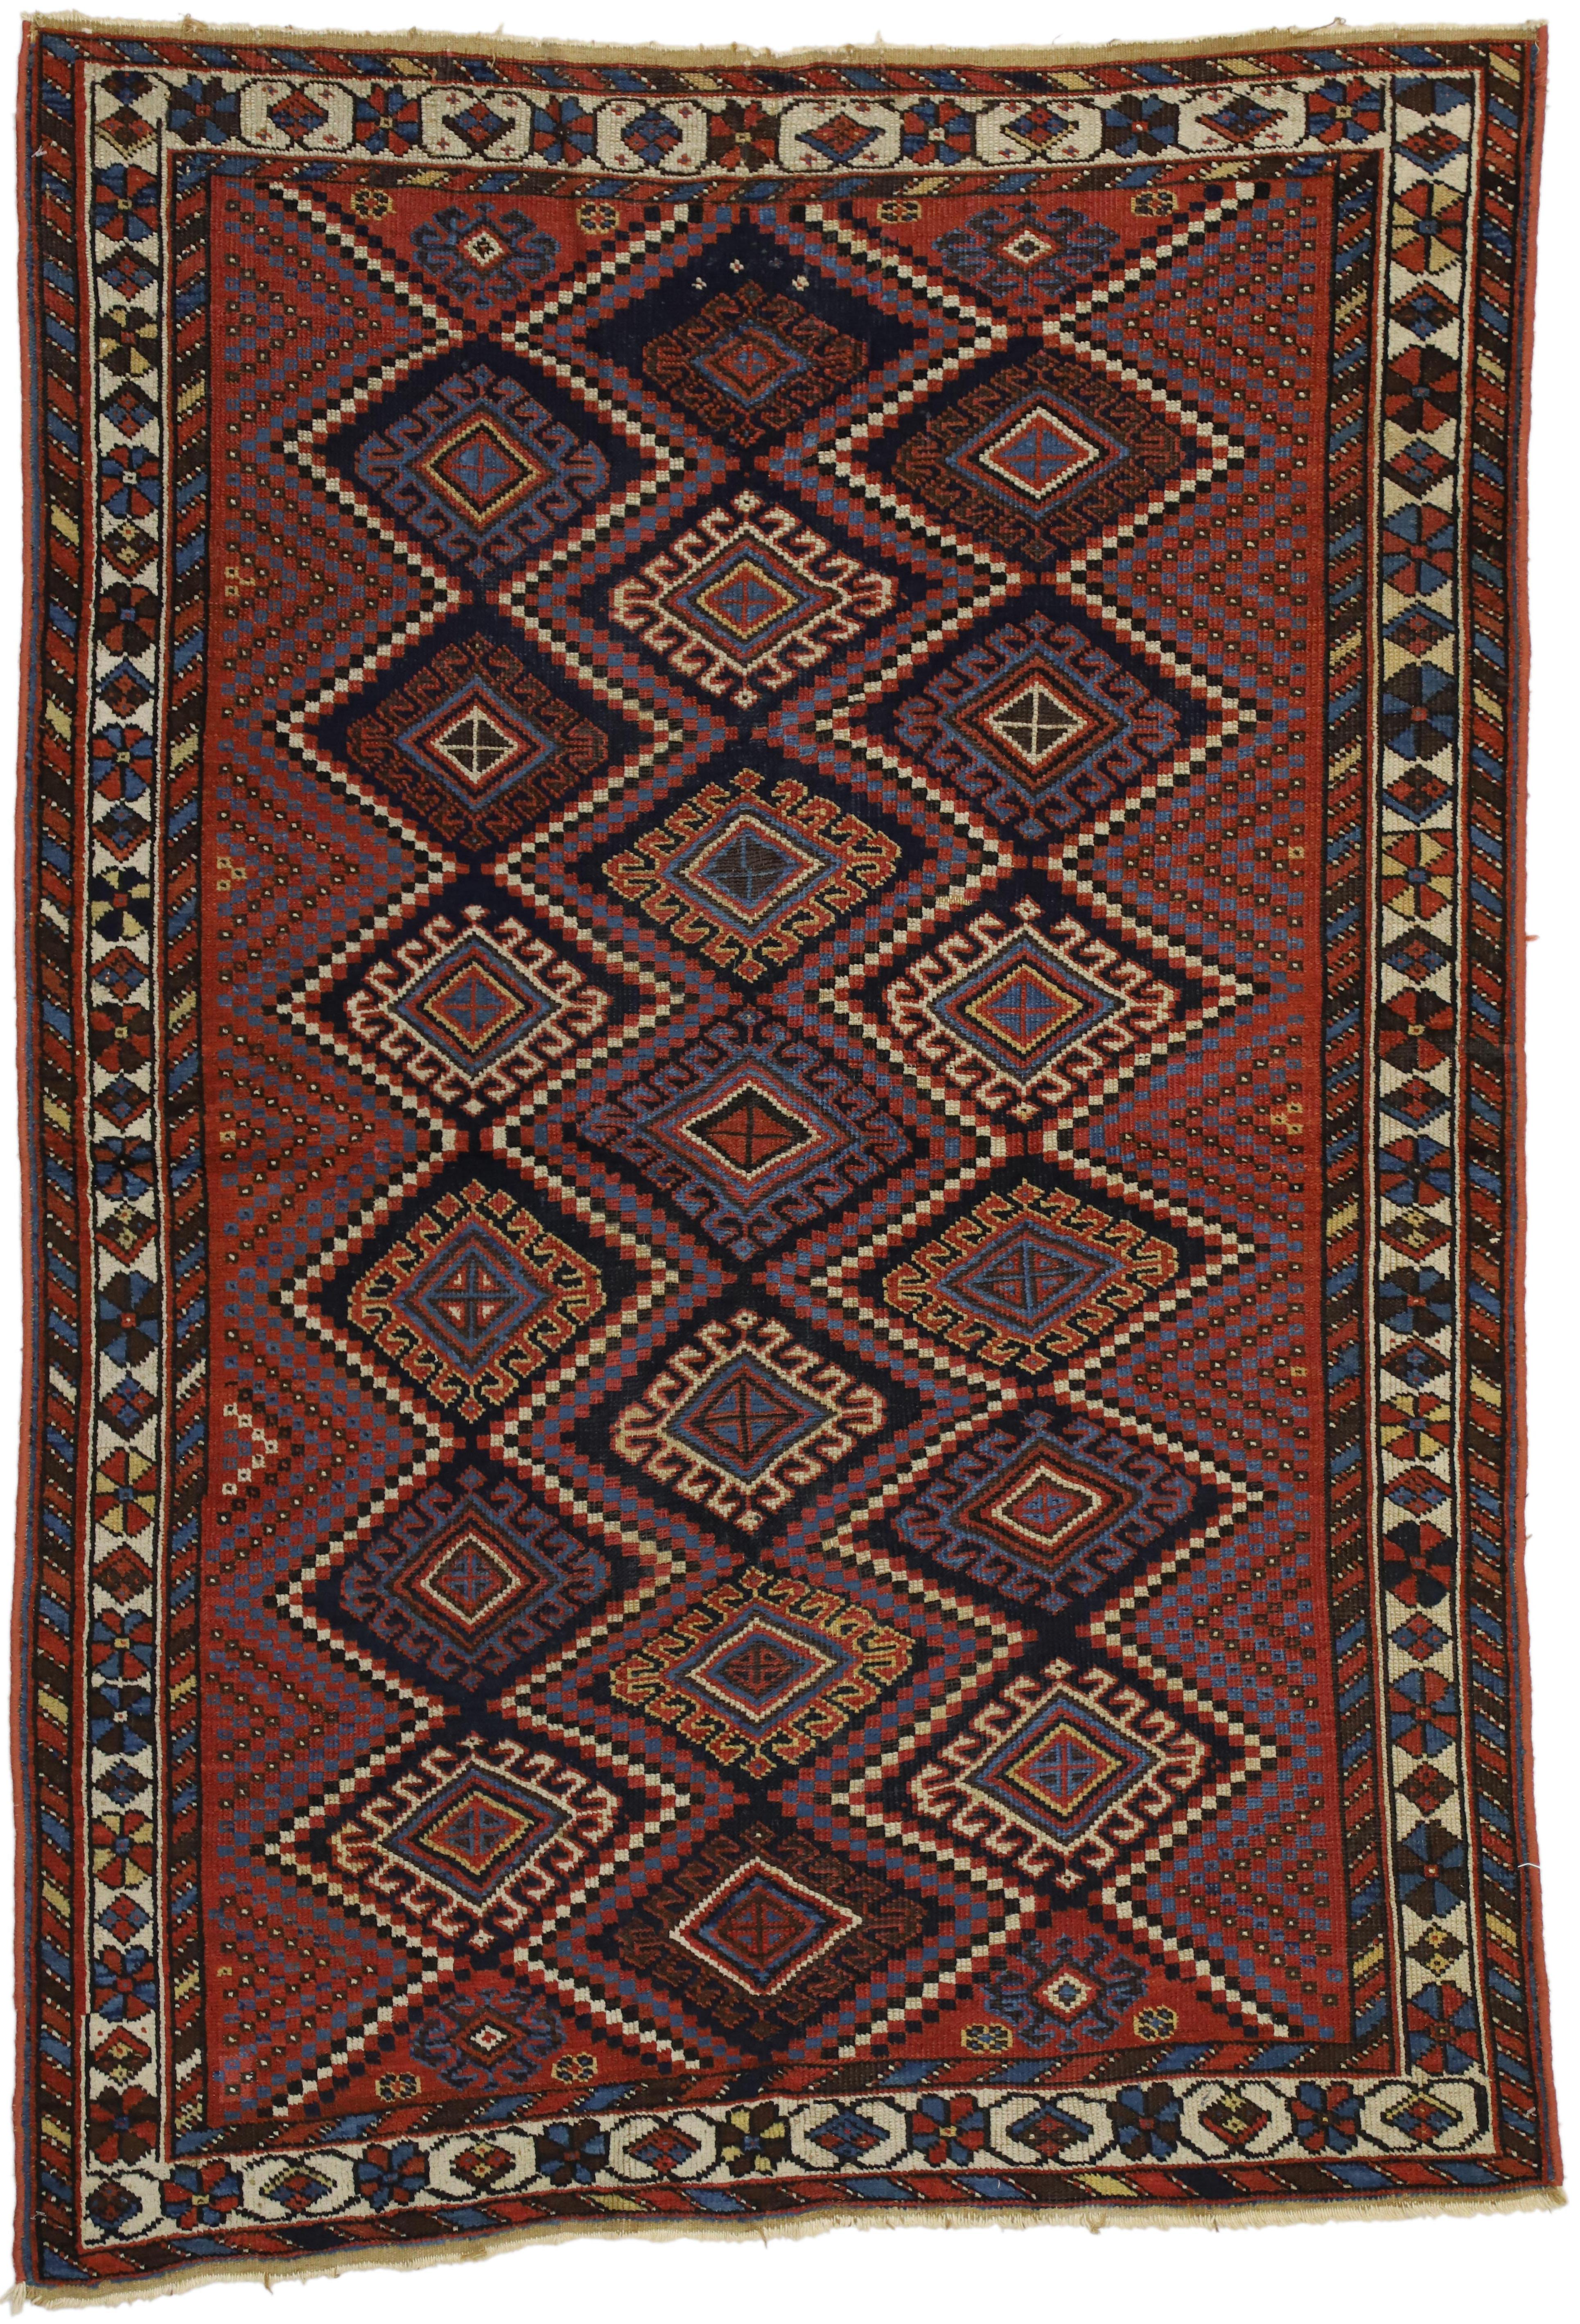 72612 Antique Persian Afshar Rug with Modern Tribal Style. This hand-knotted wool antique Persian Afshar rug with modern tribal style features a lavishly colored composition displaying three stacked rows of repetitive ram’s Horn and hands on hips